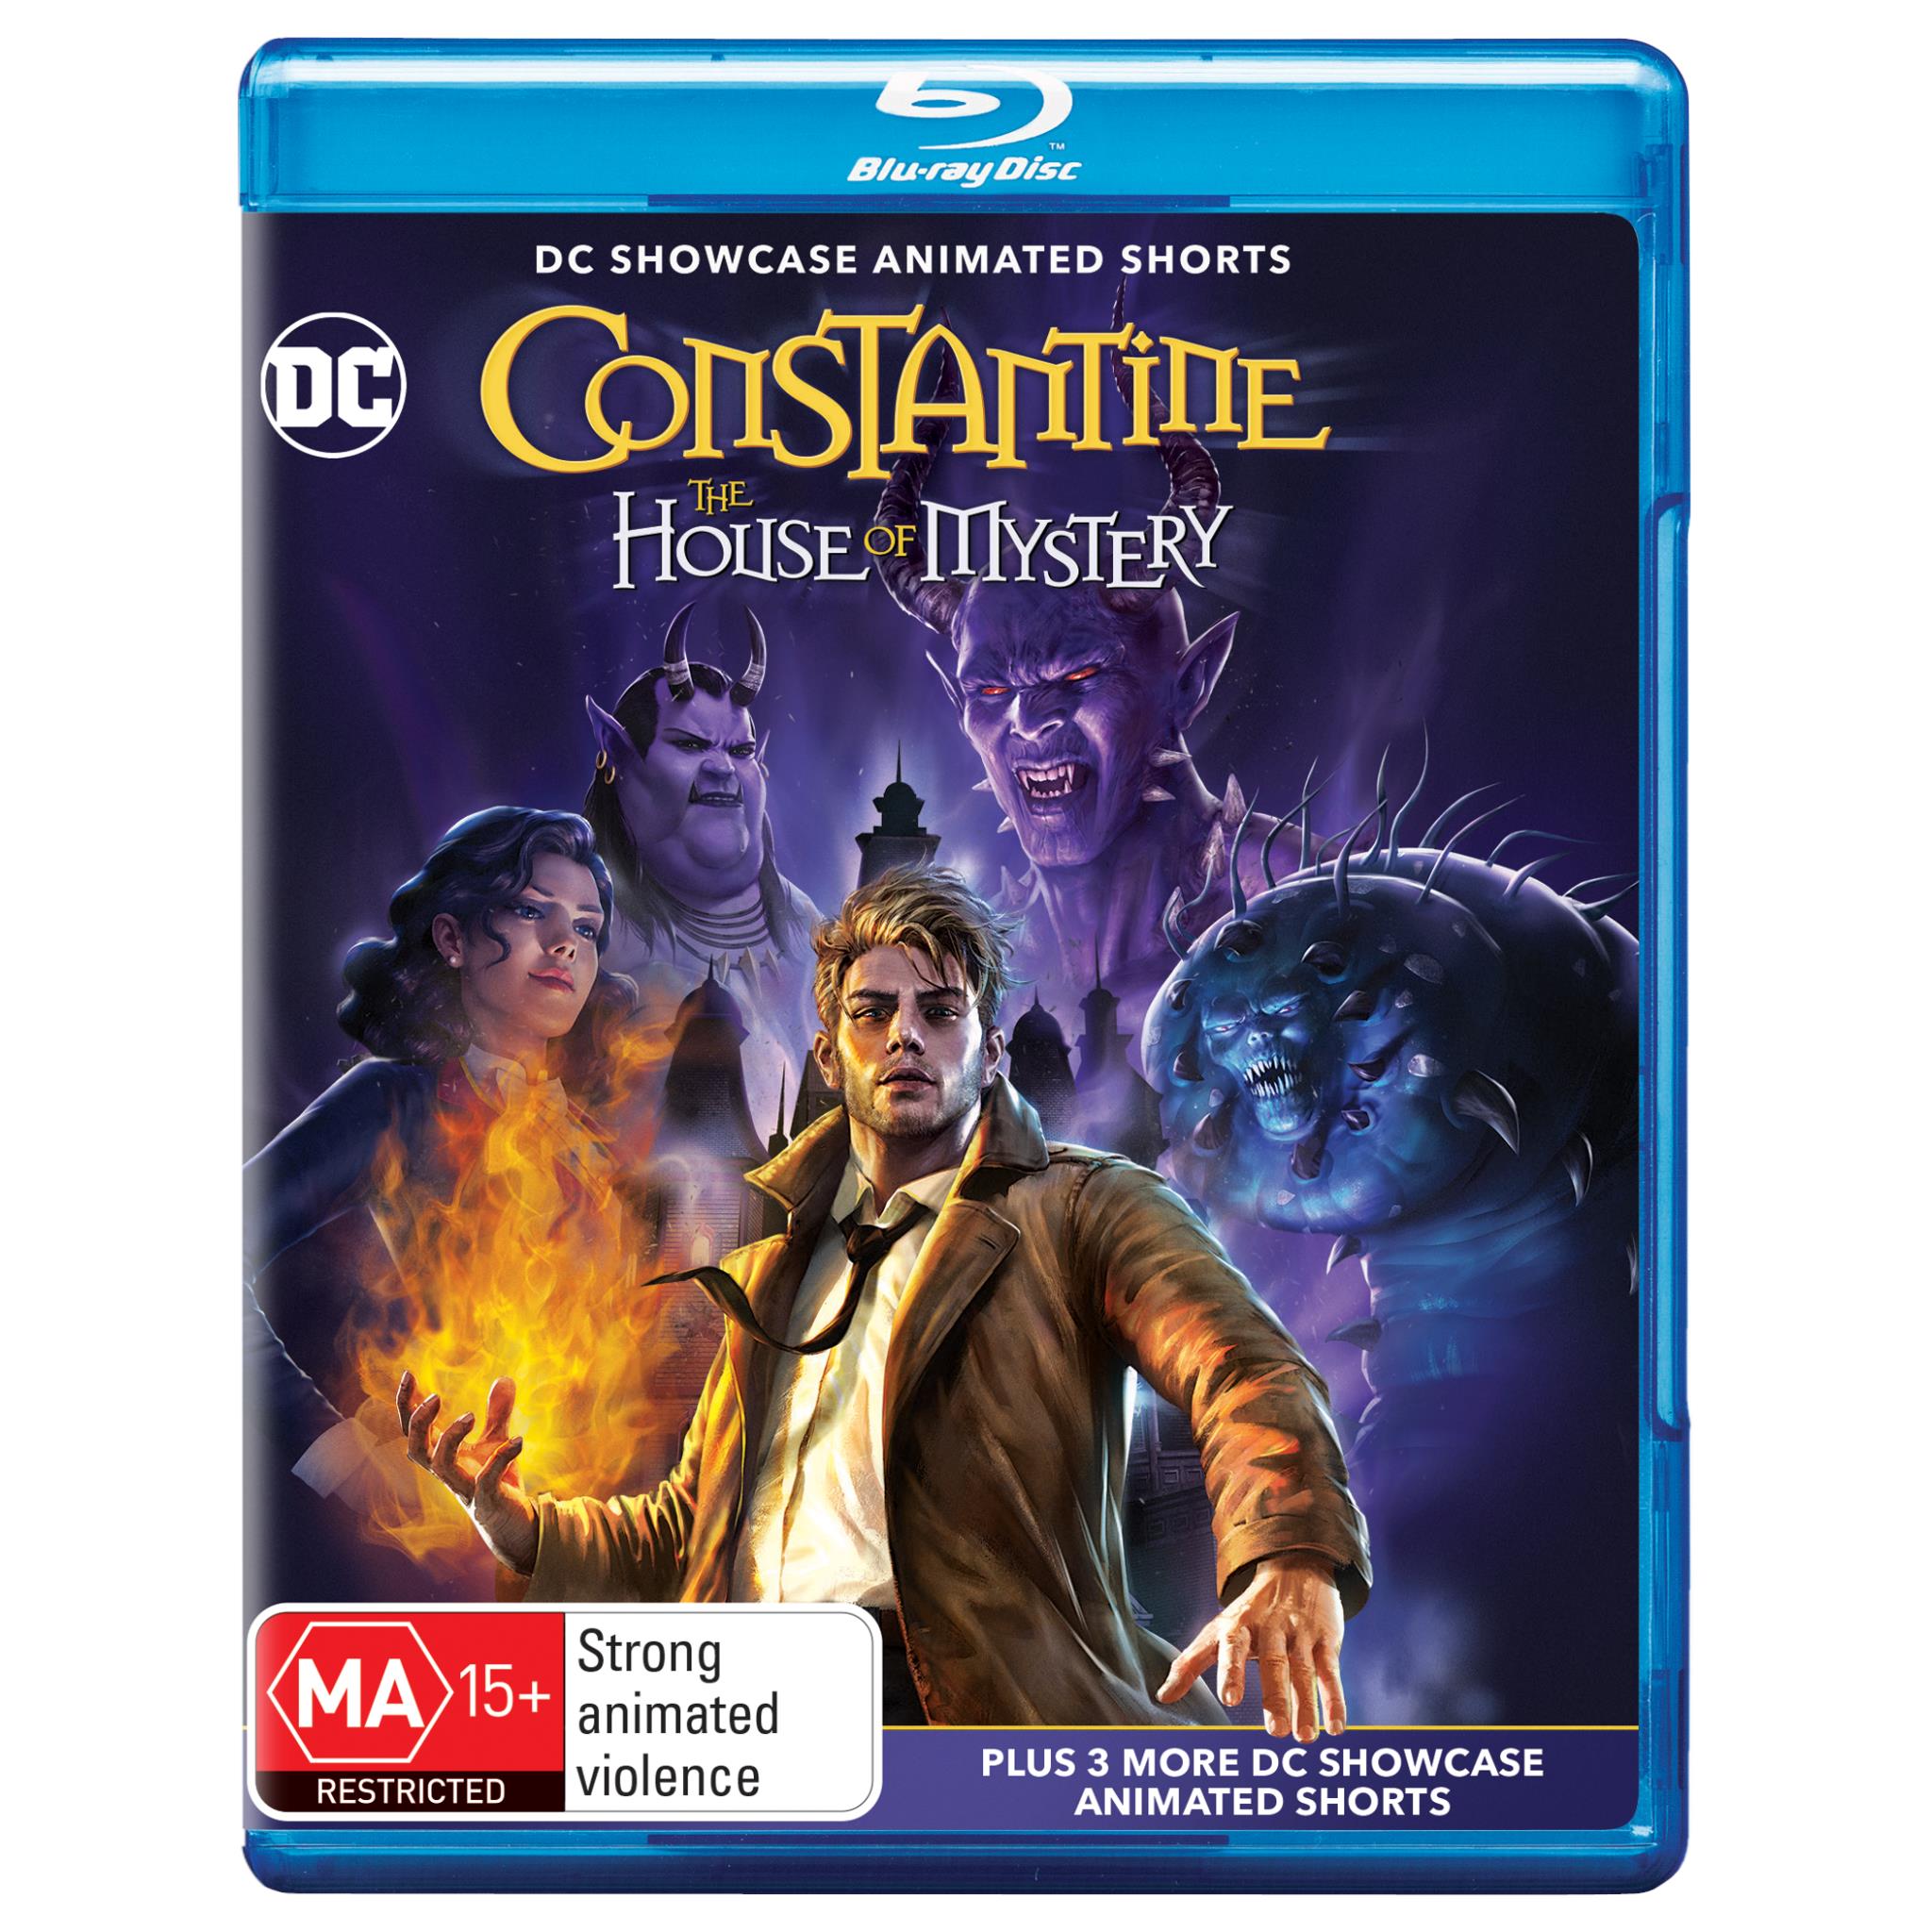 dc: constantine - house of mystery